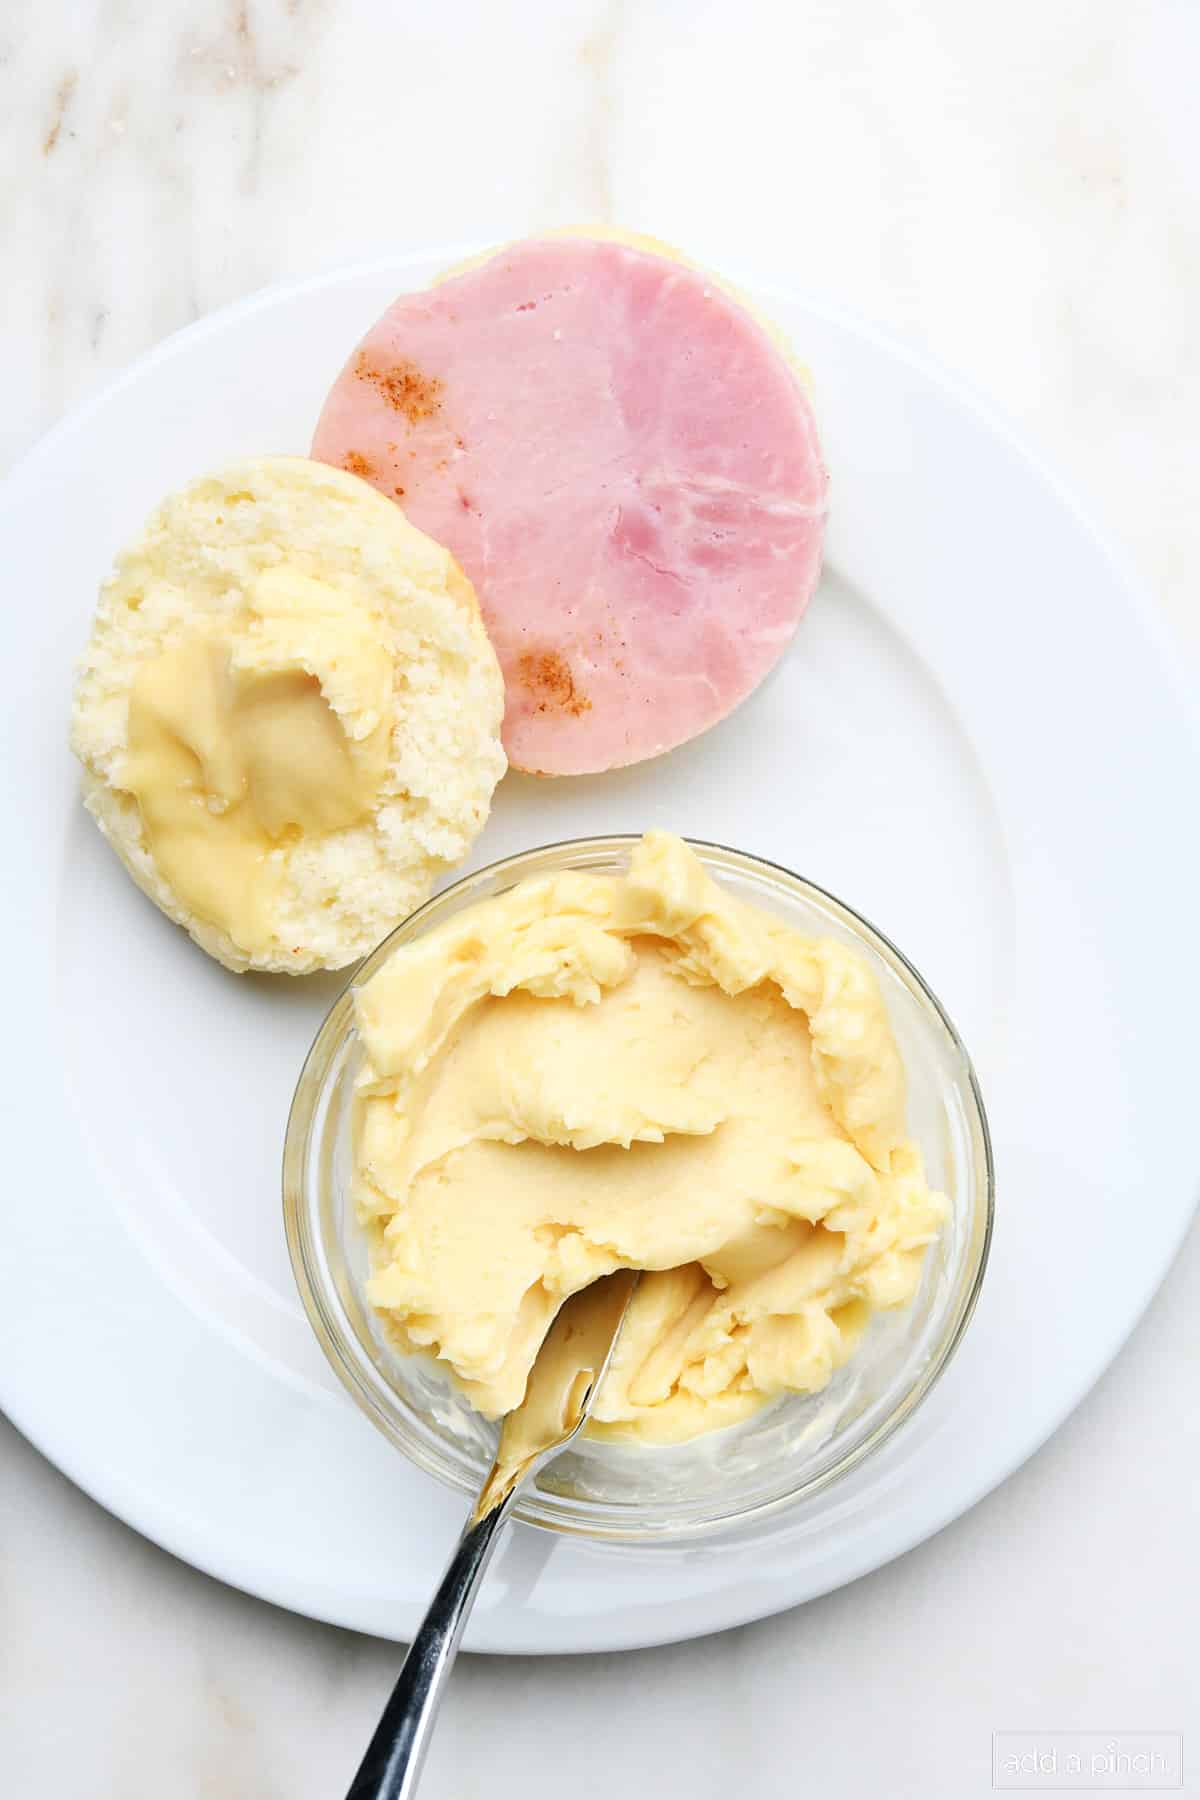 Honey butter in a glass bowl with butter knife and spread onto the top of a biscuit with ham on the side of the plate.